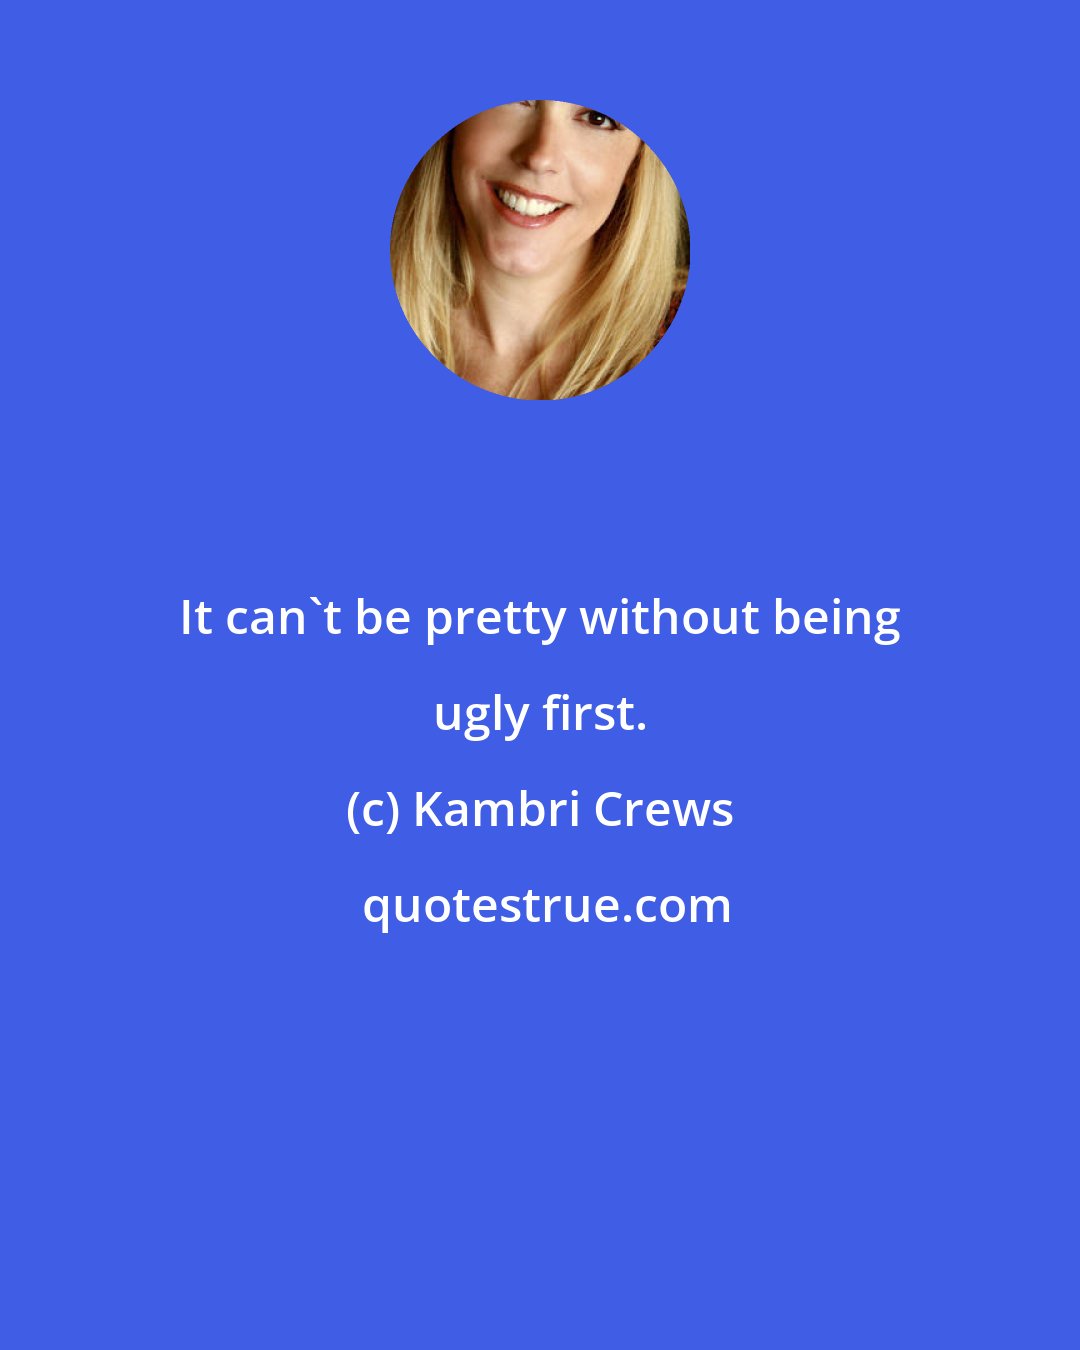 Kambri Crews: It can't be pretty without being ugly first.